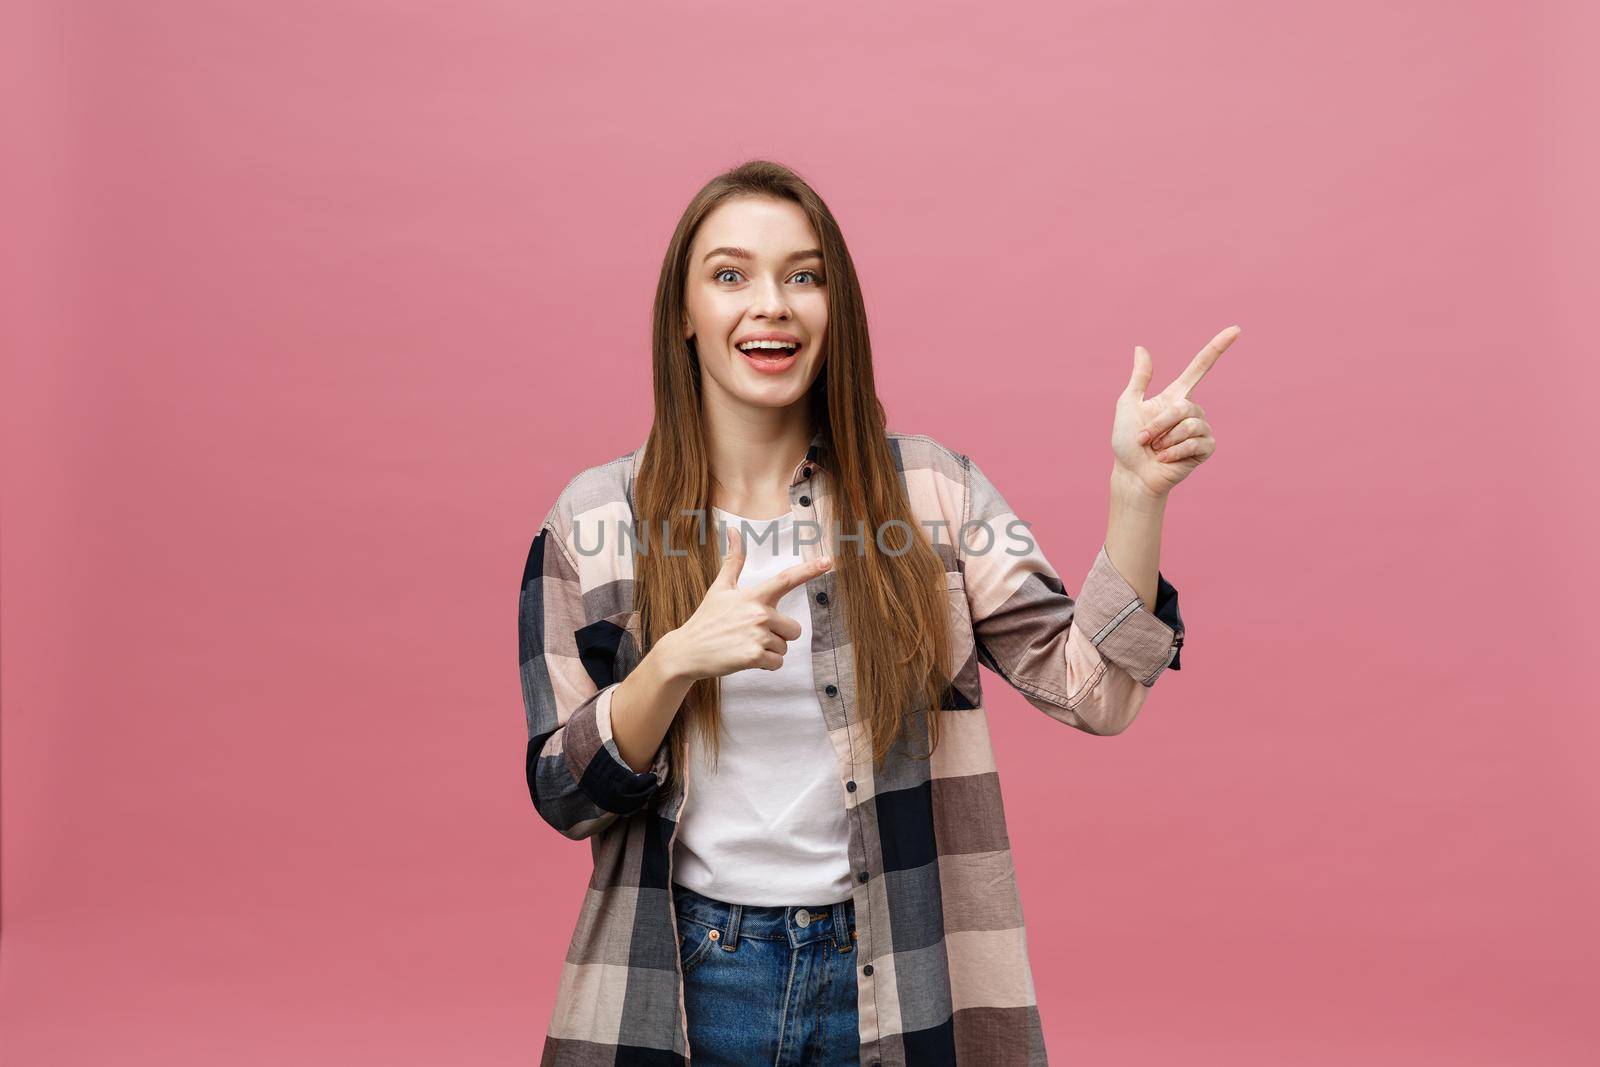 Cute young woman points a finger away isolate over pink background. Copy Space